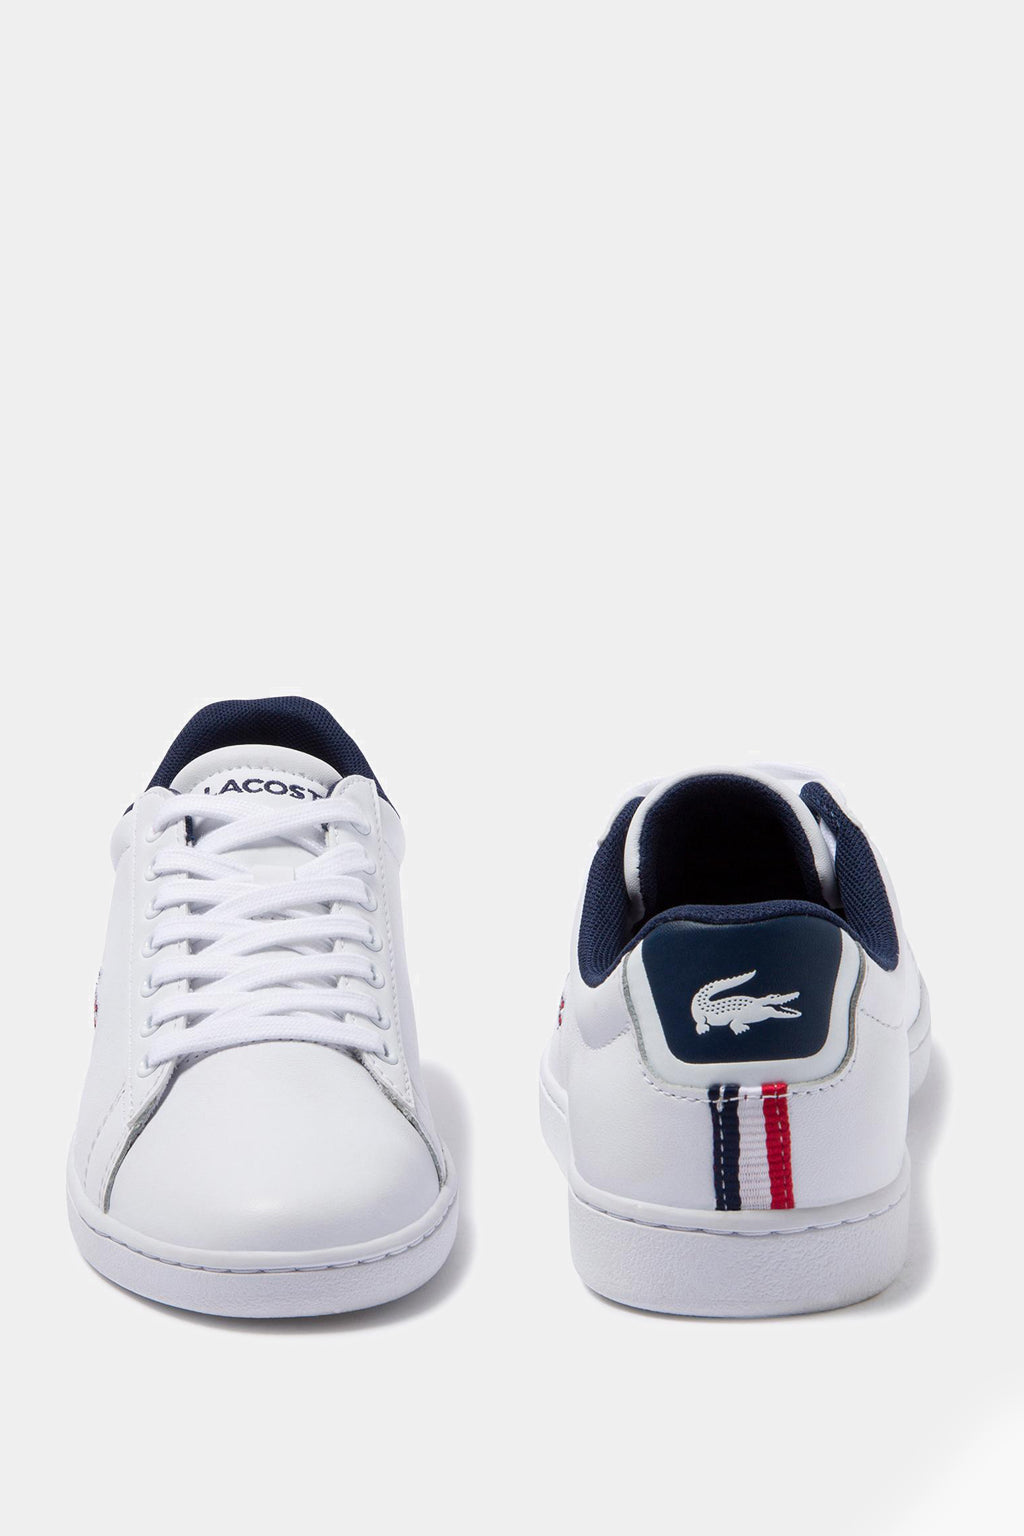 Lacoste - Carnaby Evo Tri Sneakers